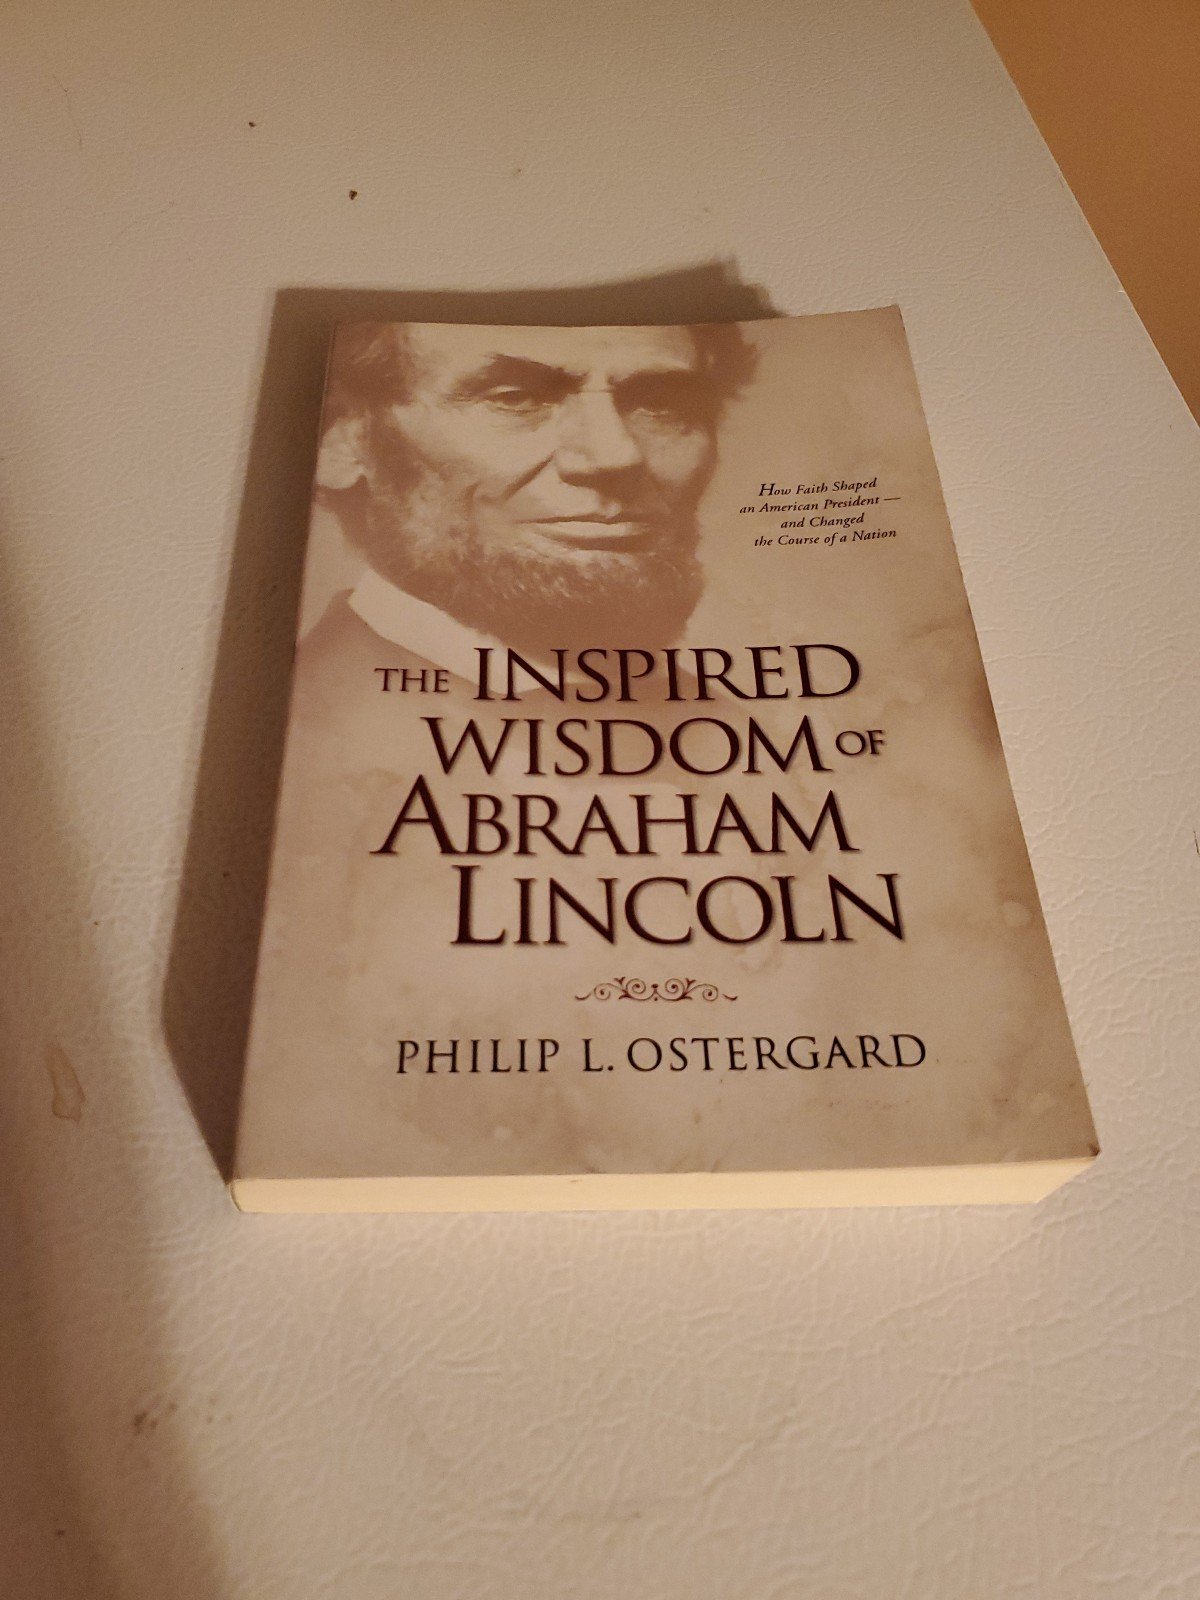 Book The Inspired Wisdom of Abraham Lincoln by Philip L. Ostergard LcmxnxMuO